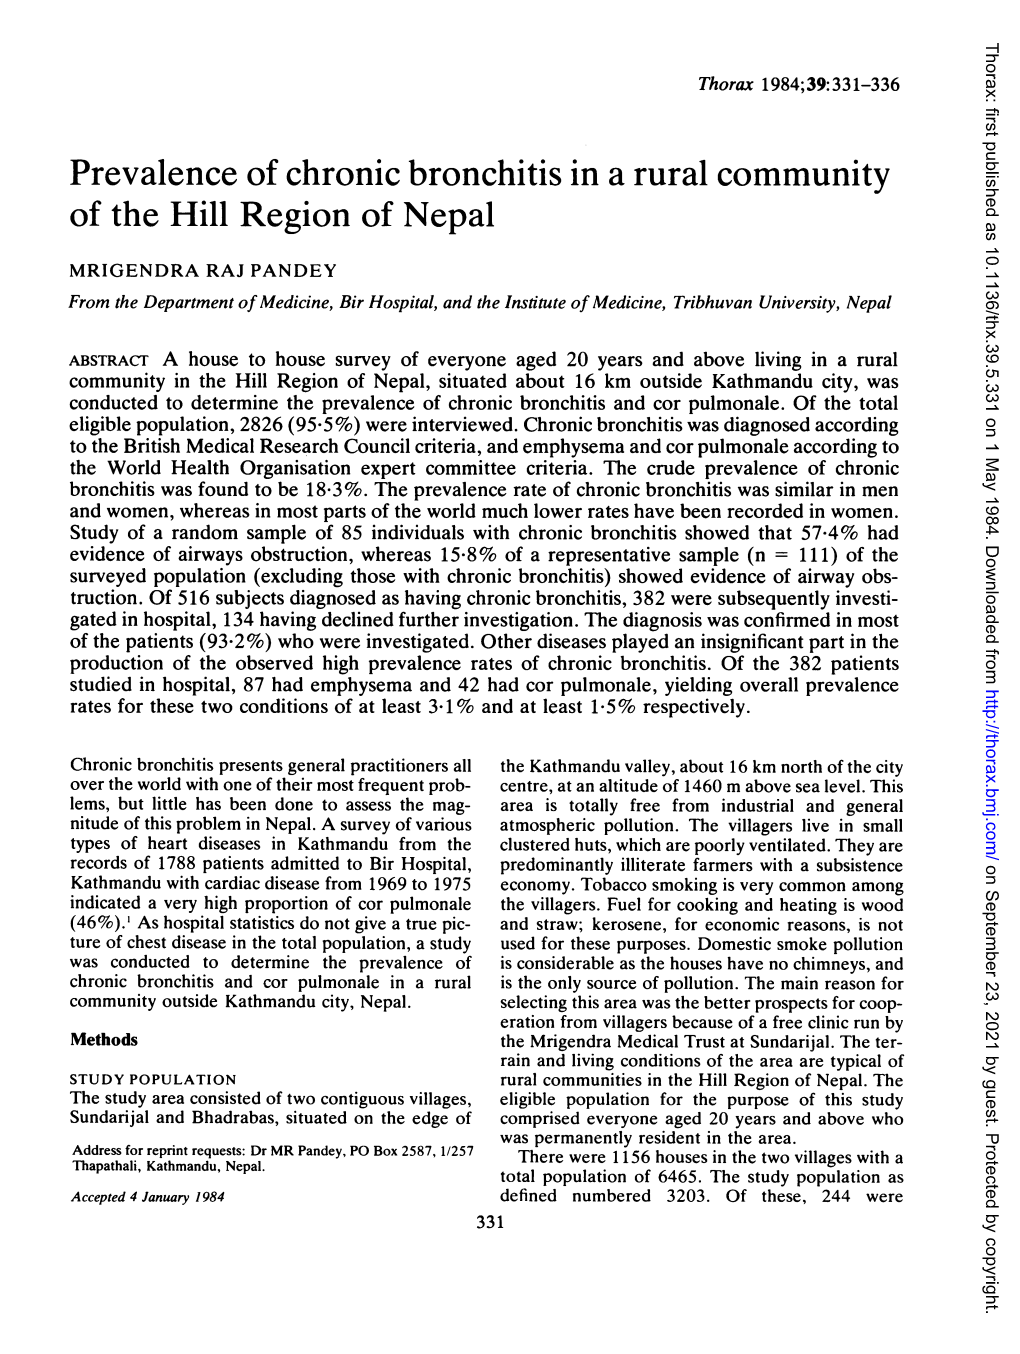 Prevalence of Chronic Bronchitis in a Rural Community of the Hill Region of Nepal